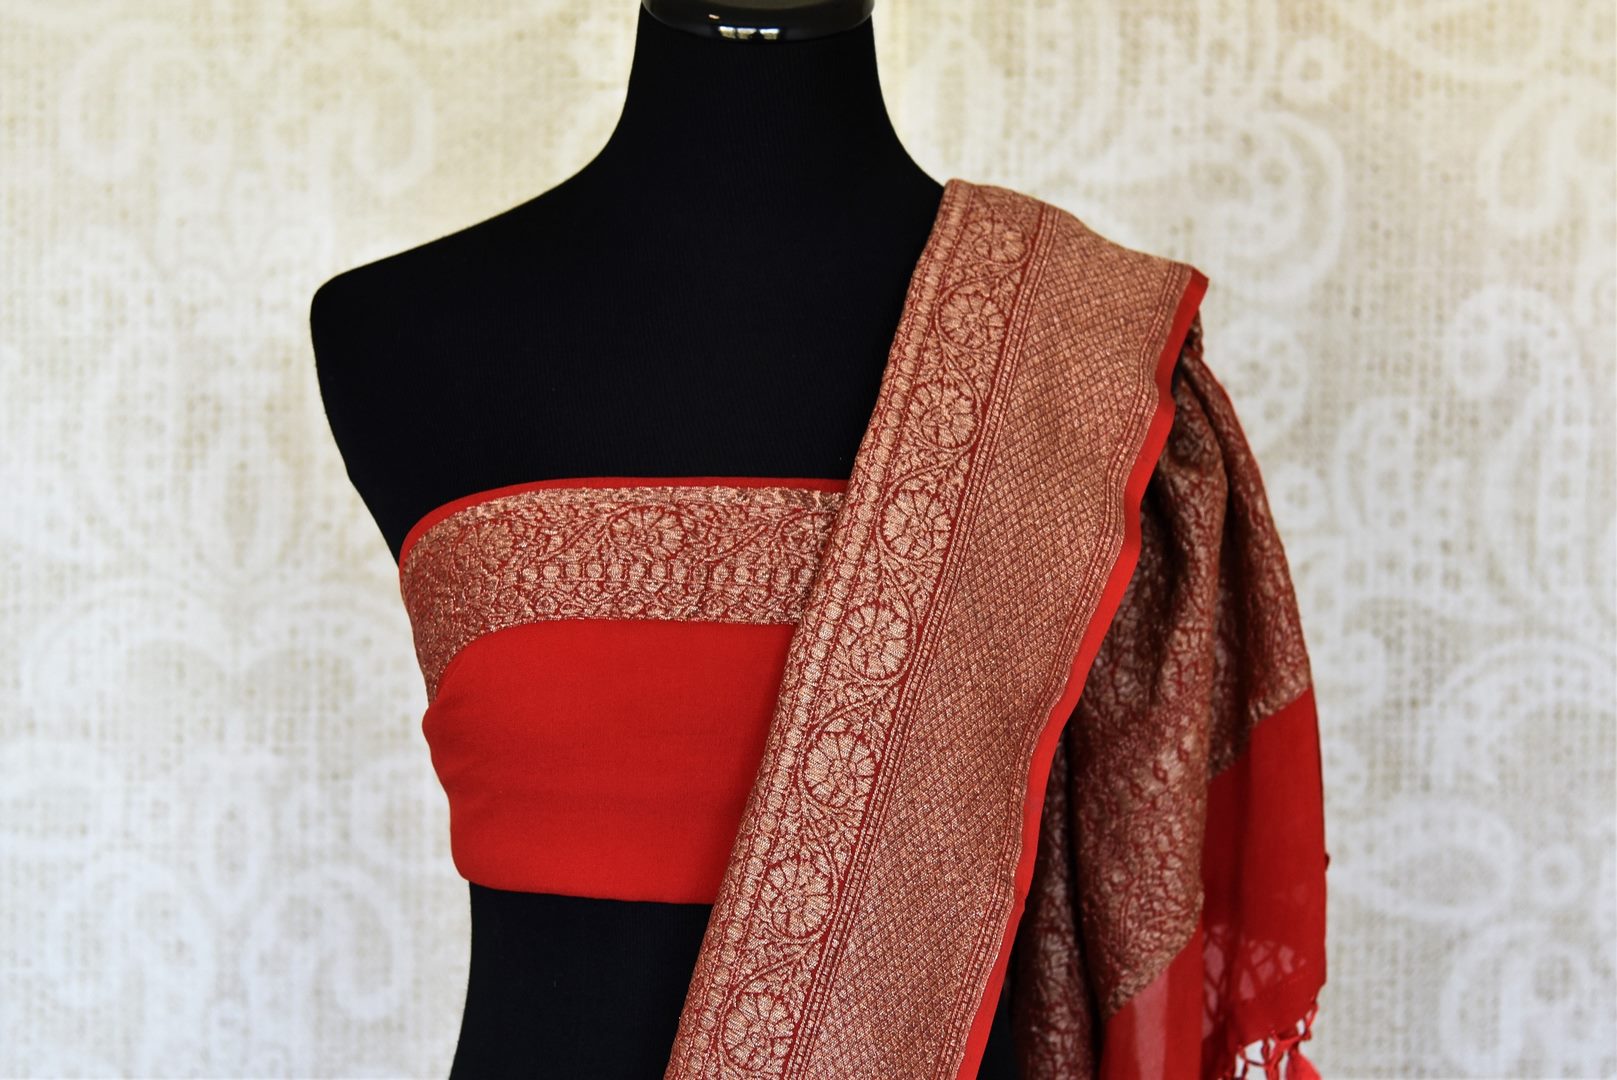 Buy ink blue georgette Banarasi sari online in USA with red antique zari border. Feel traditional on special occasions in beautiful Indian designer saris from Pure Elegance Indian fashion store in USA. Choose from a splendid variety of Banarasi sarees, pure handwoven saris. Buy online.-blouse pallu